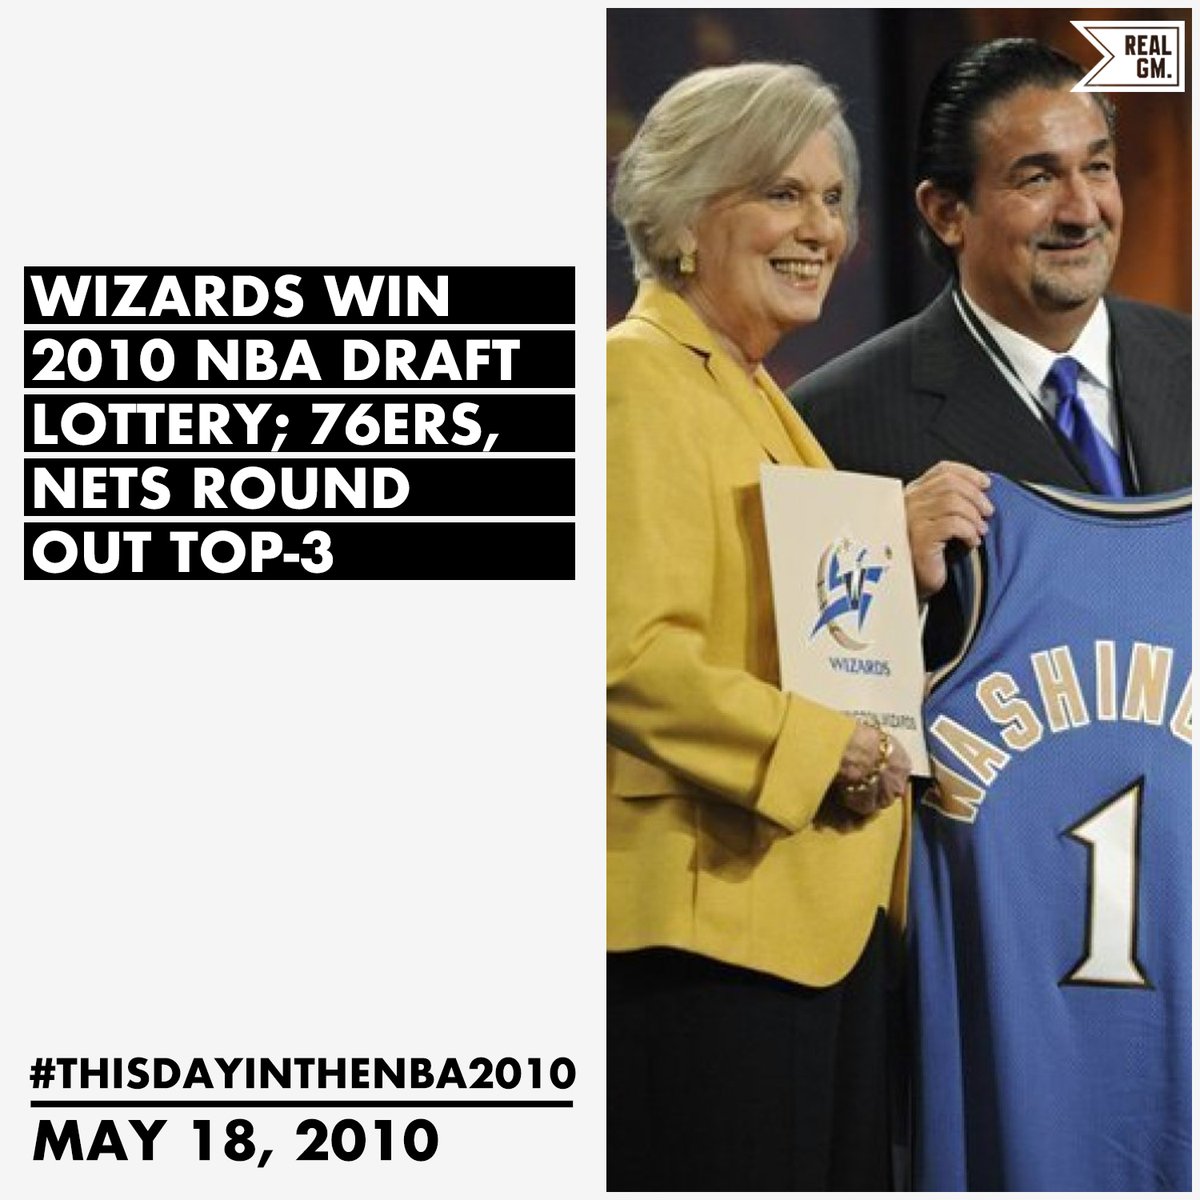  #ThisDayInTheNBA2010May 18, 2010Wizards Win 2010 NBA Draft Lottery; 76ers, Nets Round Out Top-3 https://basketball.realgm.com/wiretap/203980/Wizards-Win-2010-NBA-Draft-Lottery;-76ers-Nets-Round-Out-Top-3